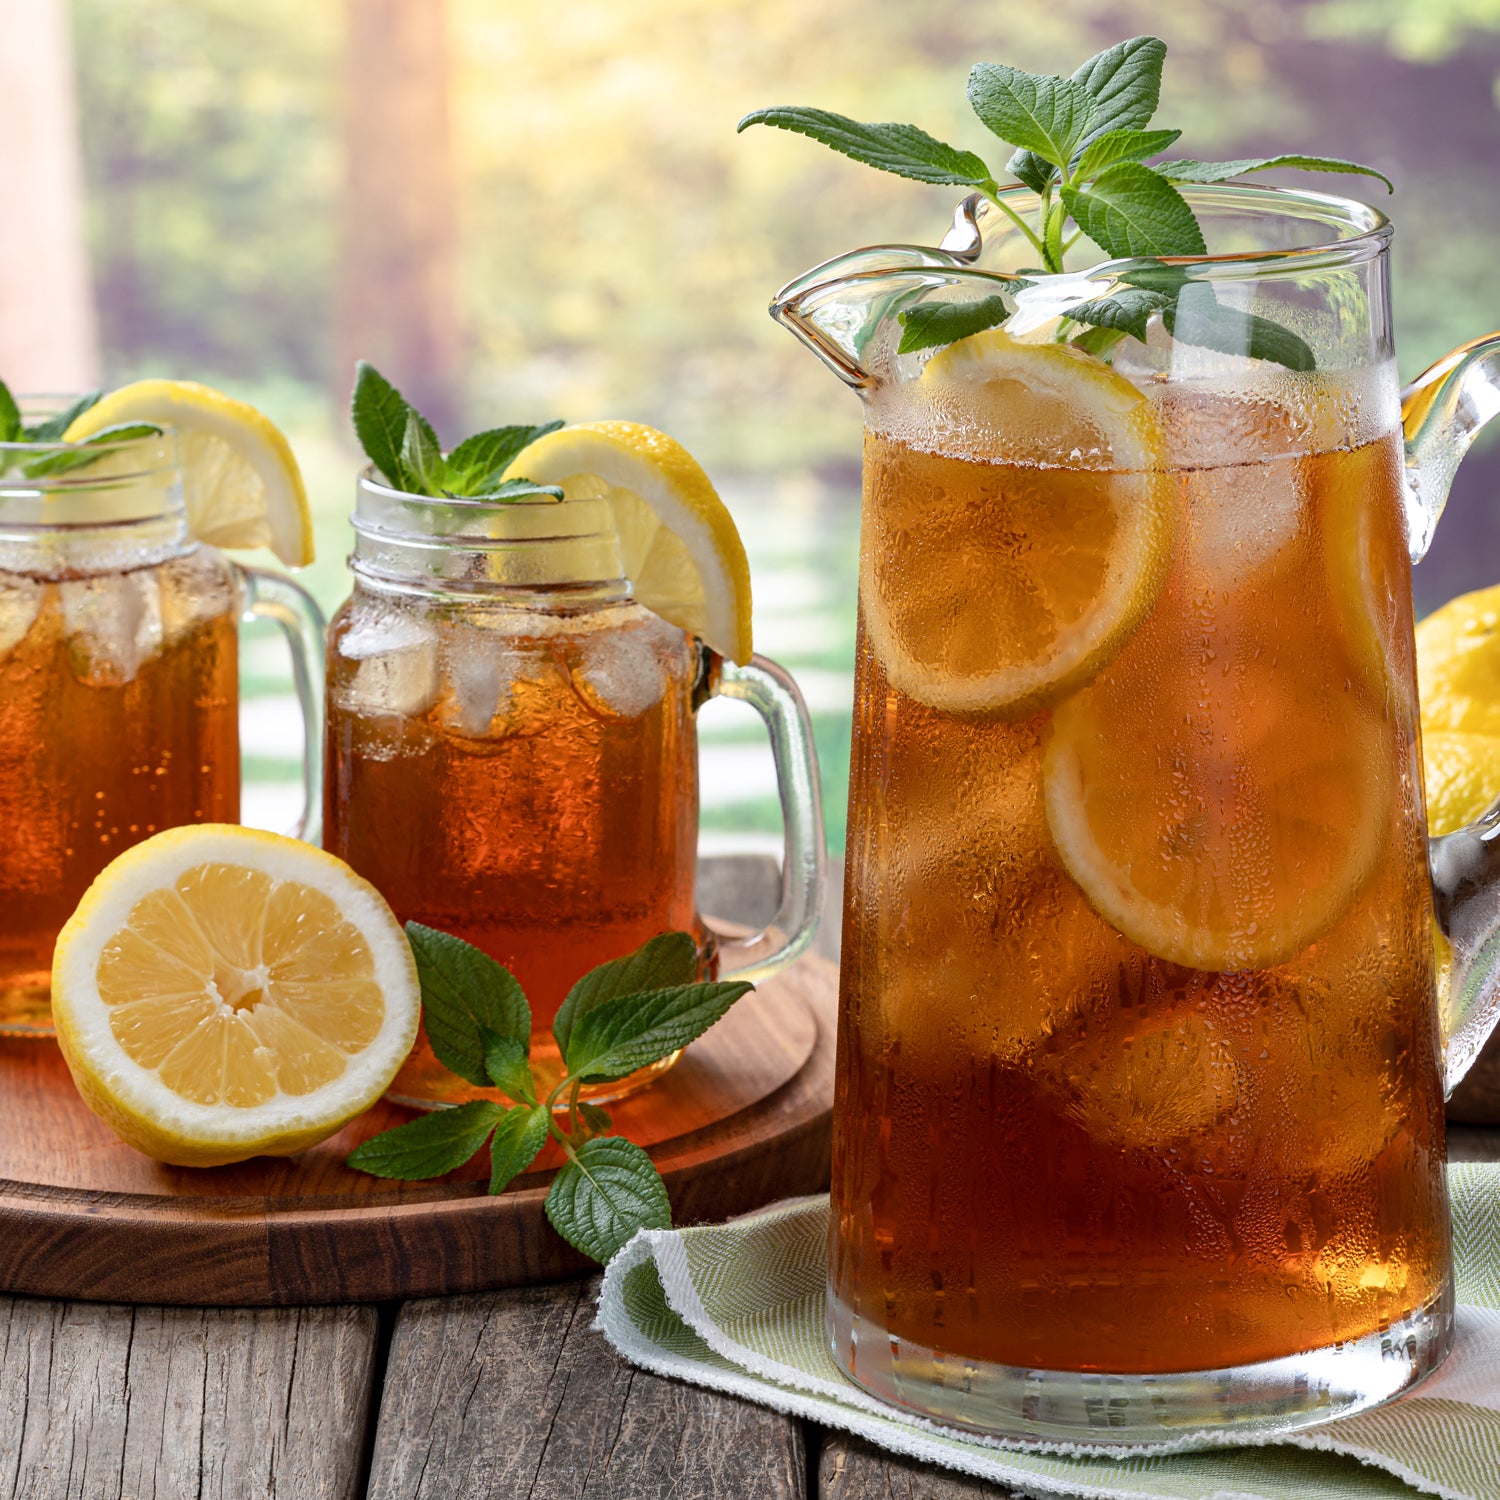 all glasses of refreshing iced tea, kissed with lemon slices, capturing the essence of summer relaxation and southern hospitality.